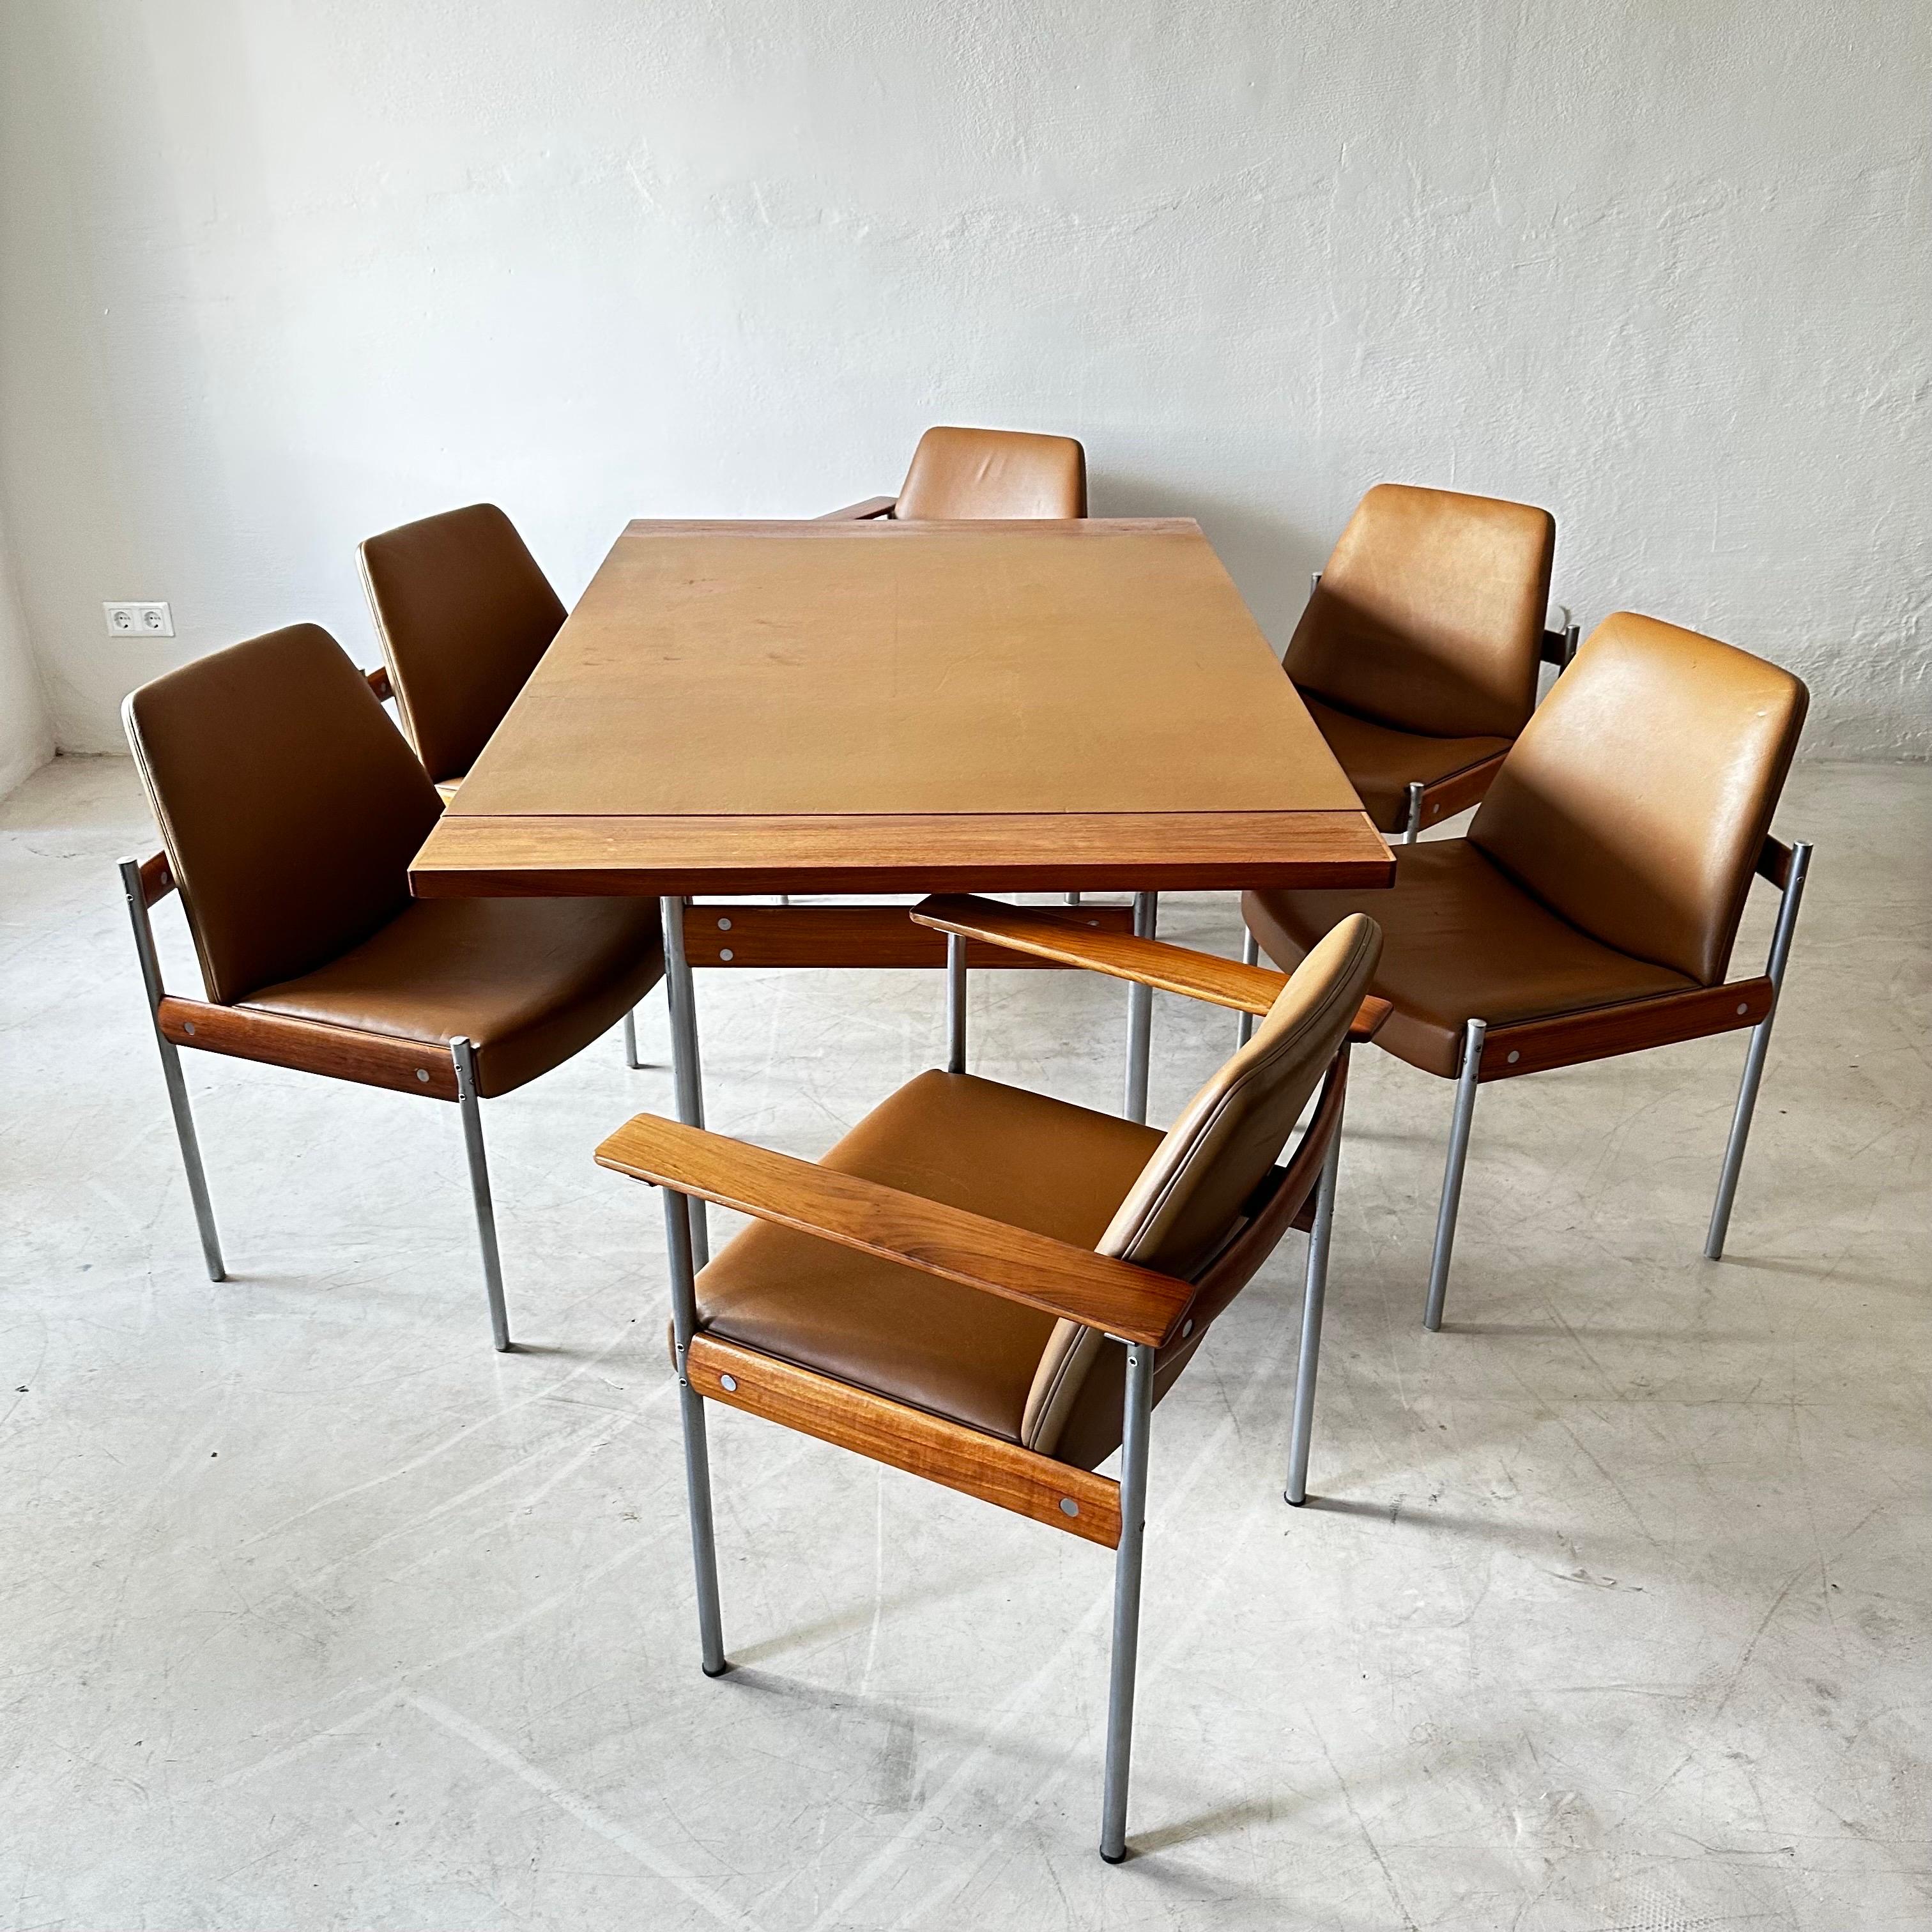 Sven Ivar Dysthe Large Set of 10 Chairs in Cognac Leather and Walnut For Sale 6